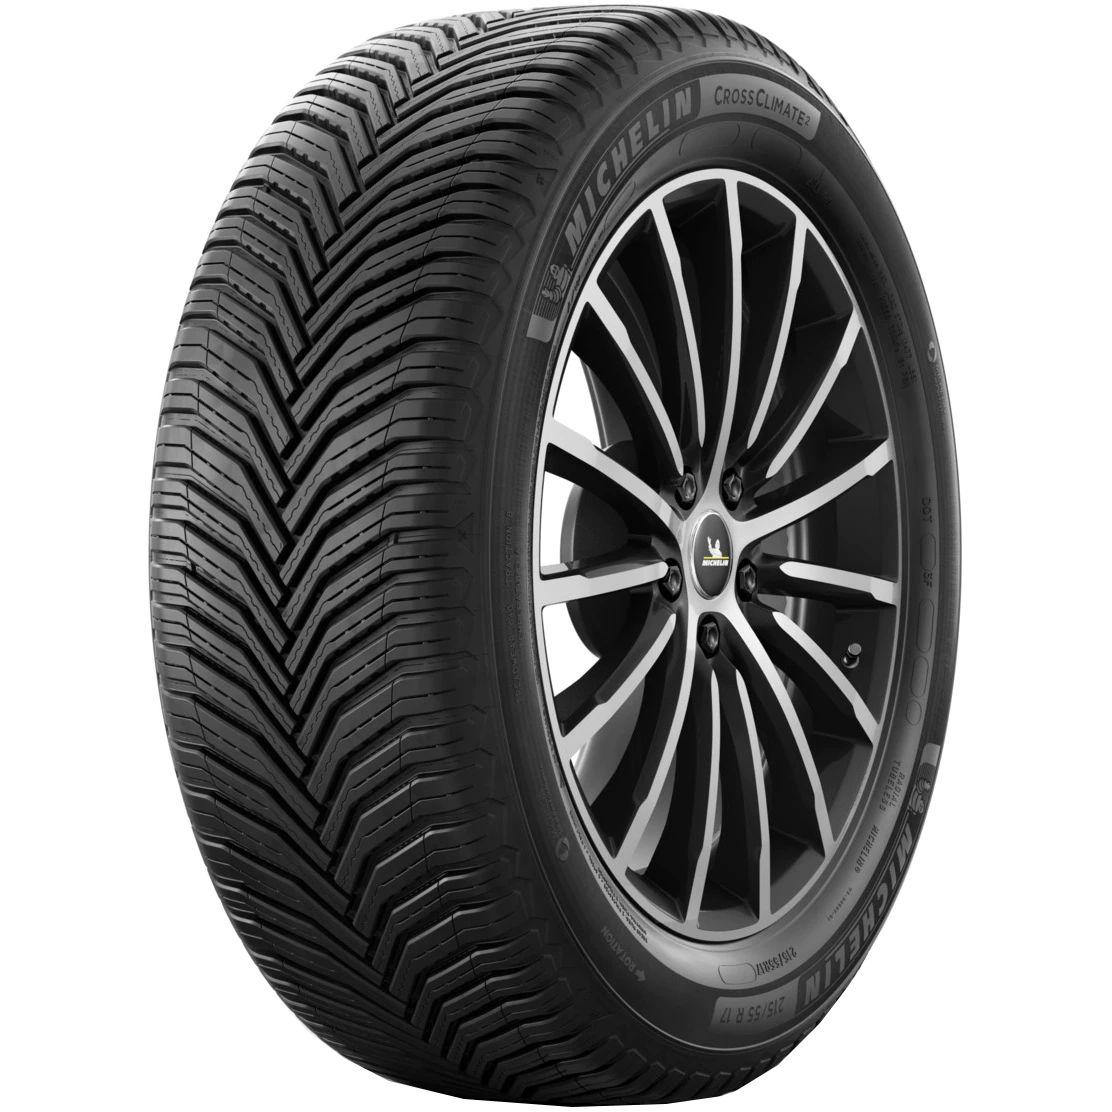 Anvelope all seasons MICHELIN CrossClimate2 M+S XL 195/60 R15 92V